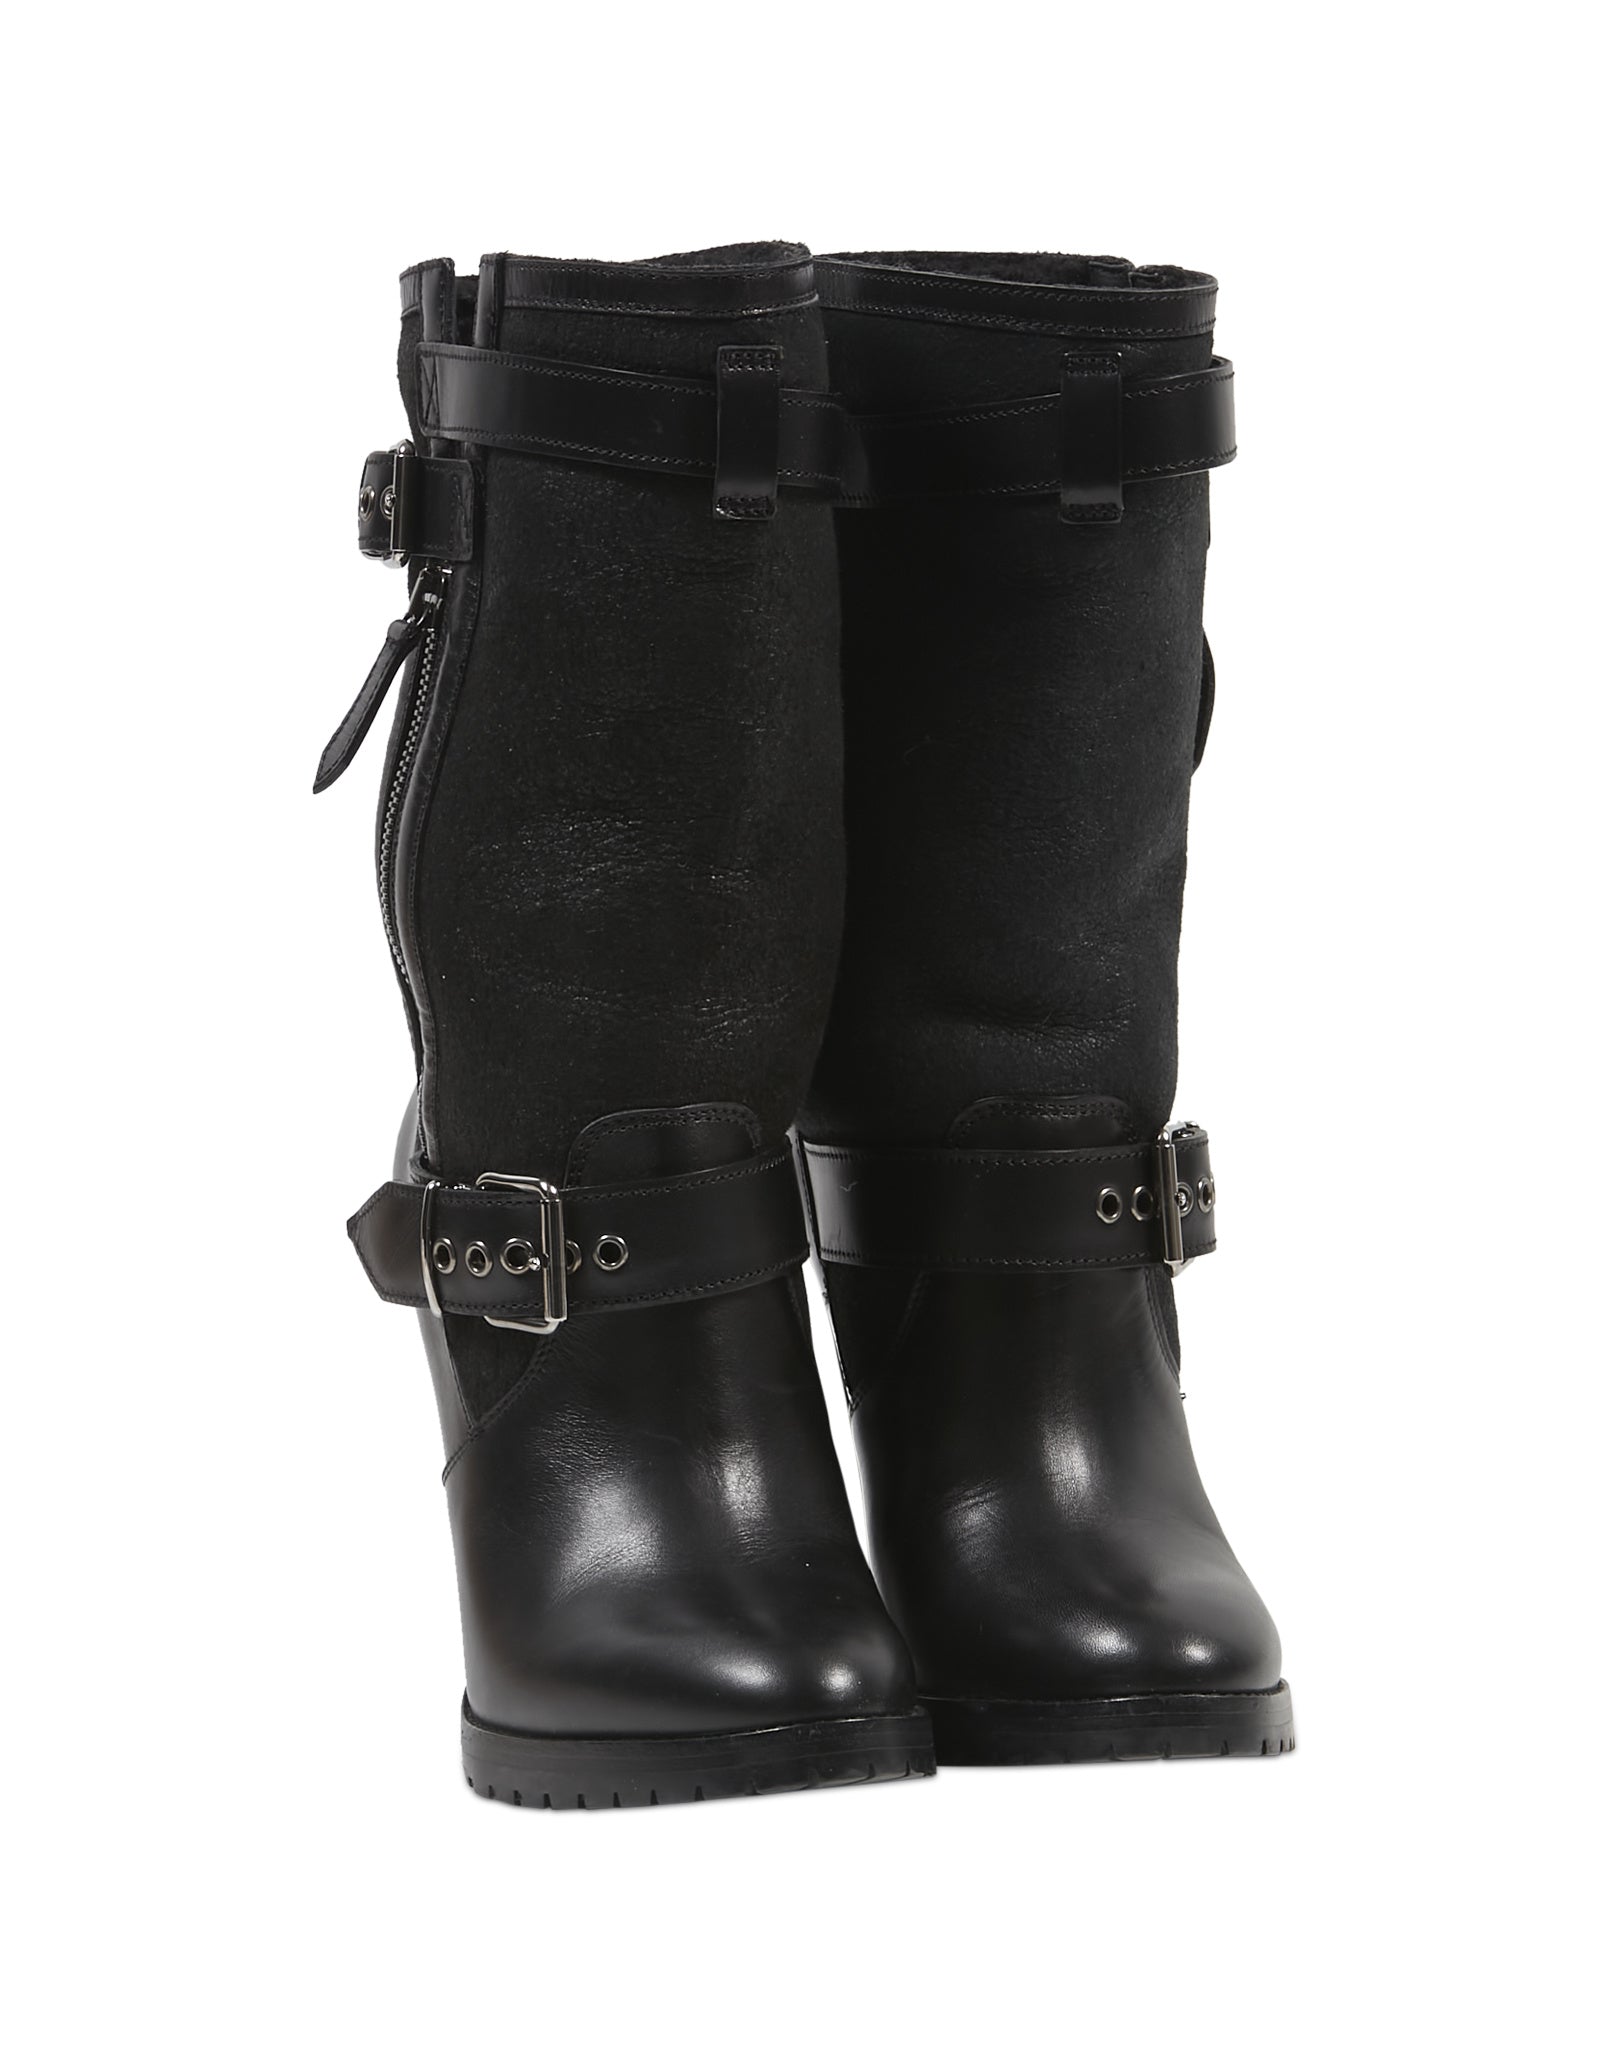 Burberry Black Leather Shearling Boots - 37